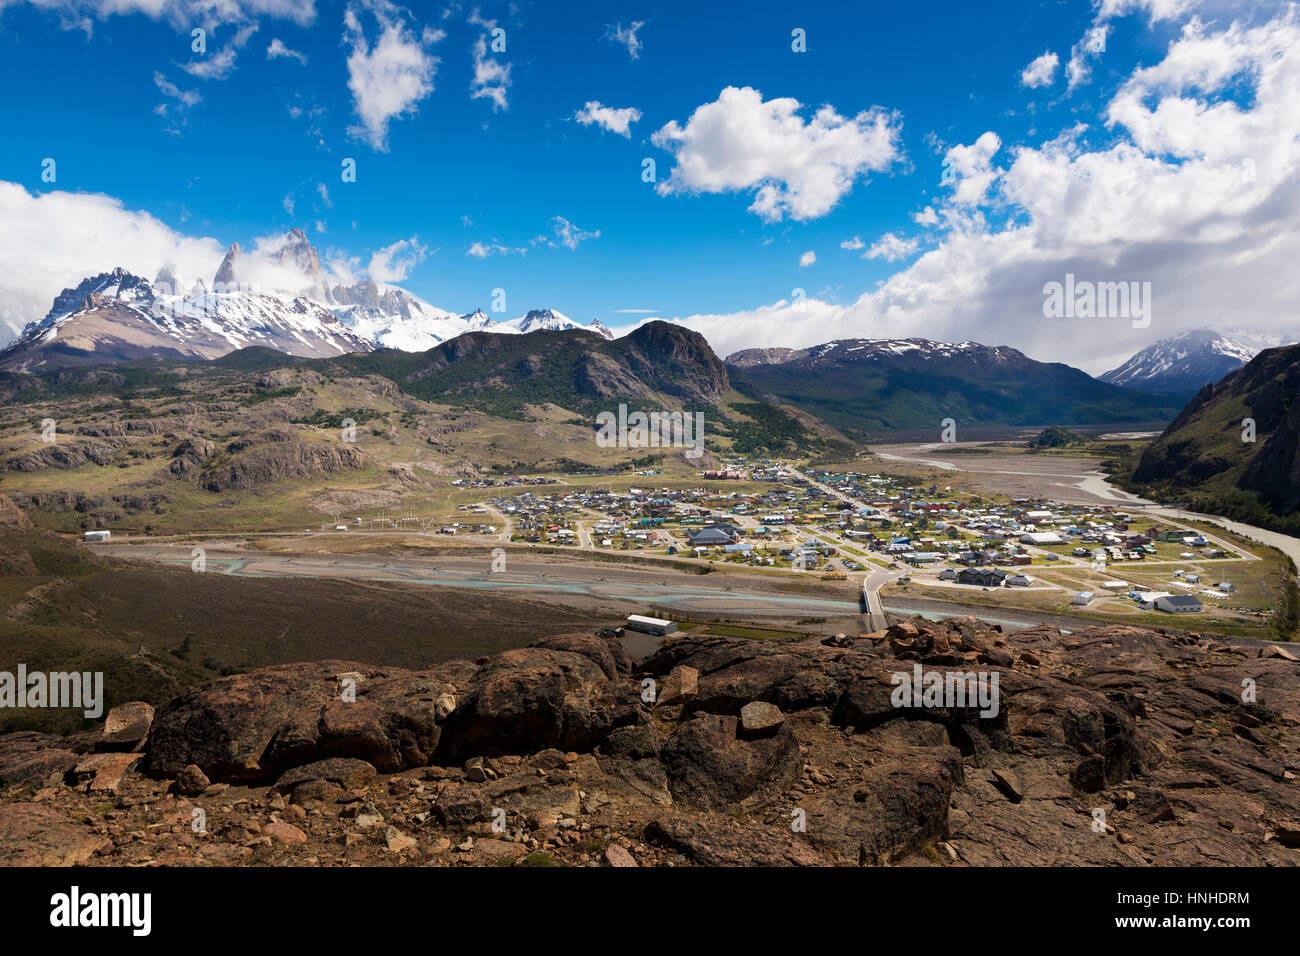 View of the village of El Chaltén and the surrounding mountains in Argentina, South America Stock Photo